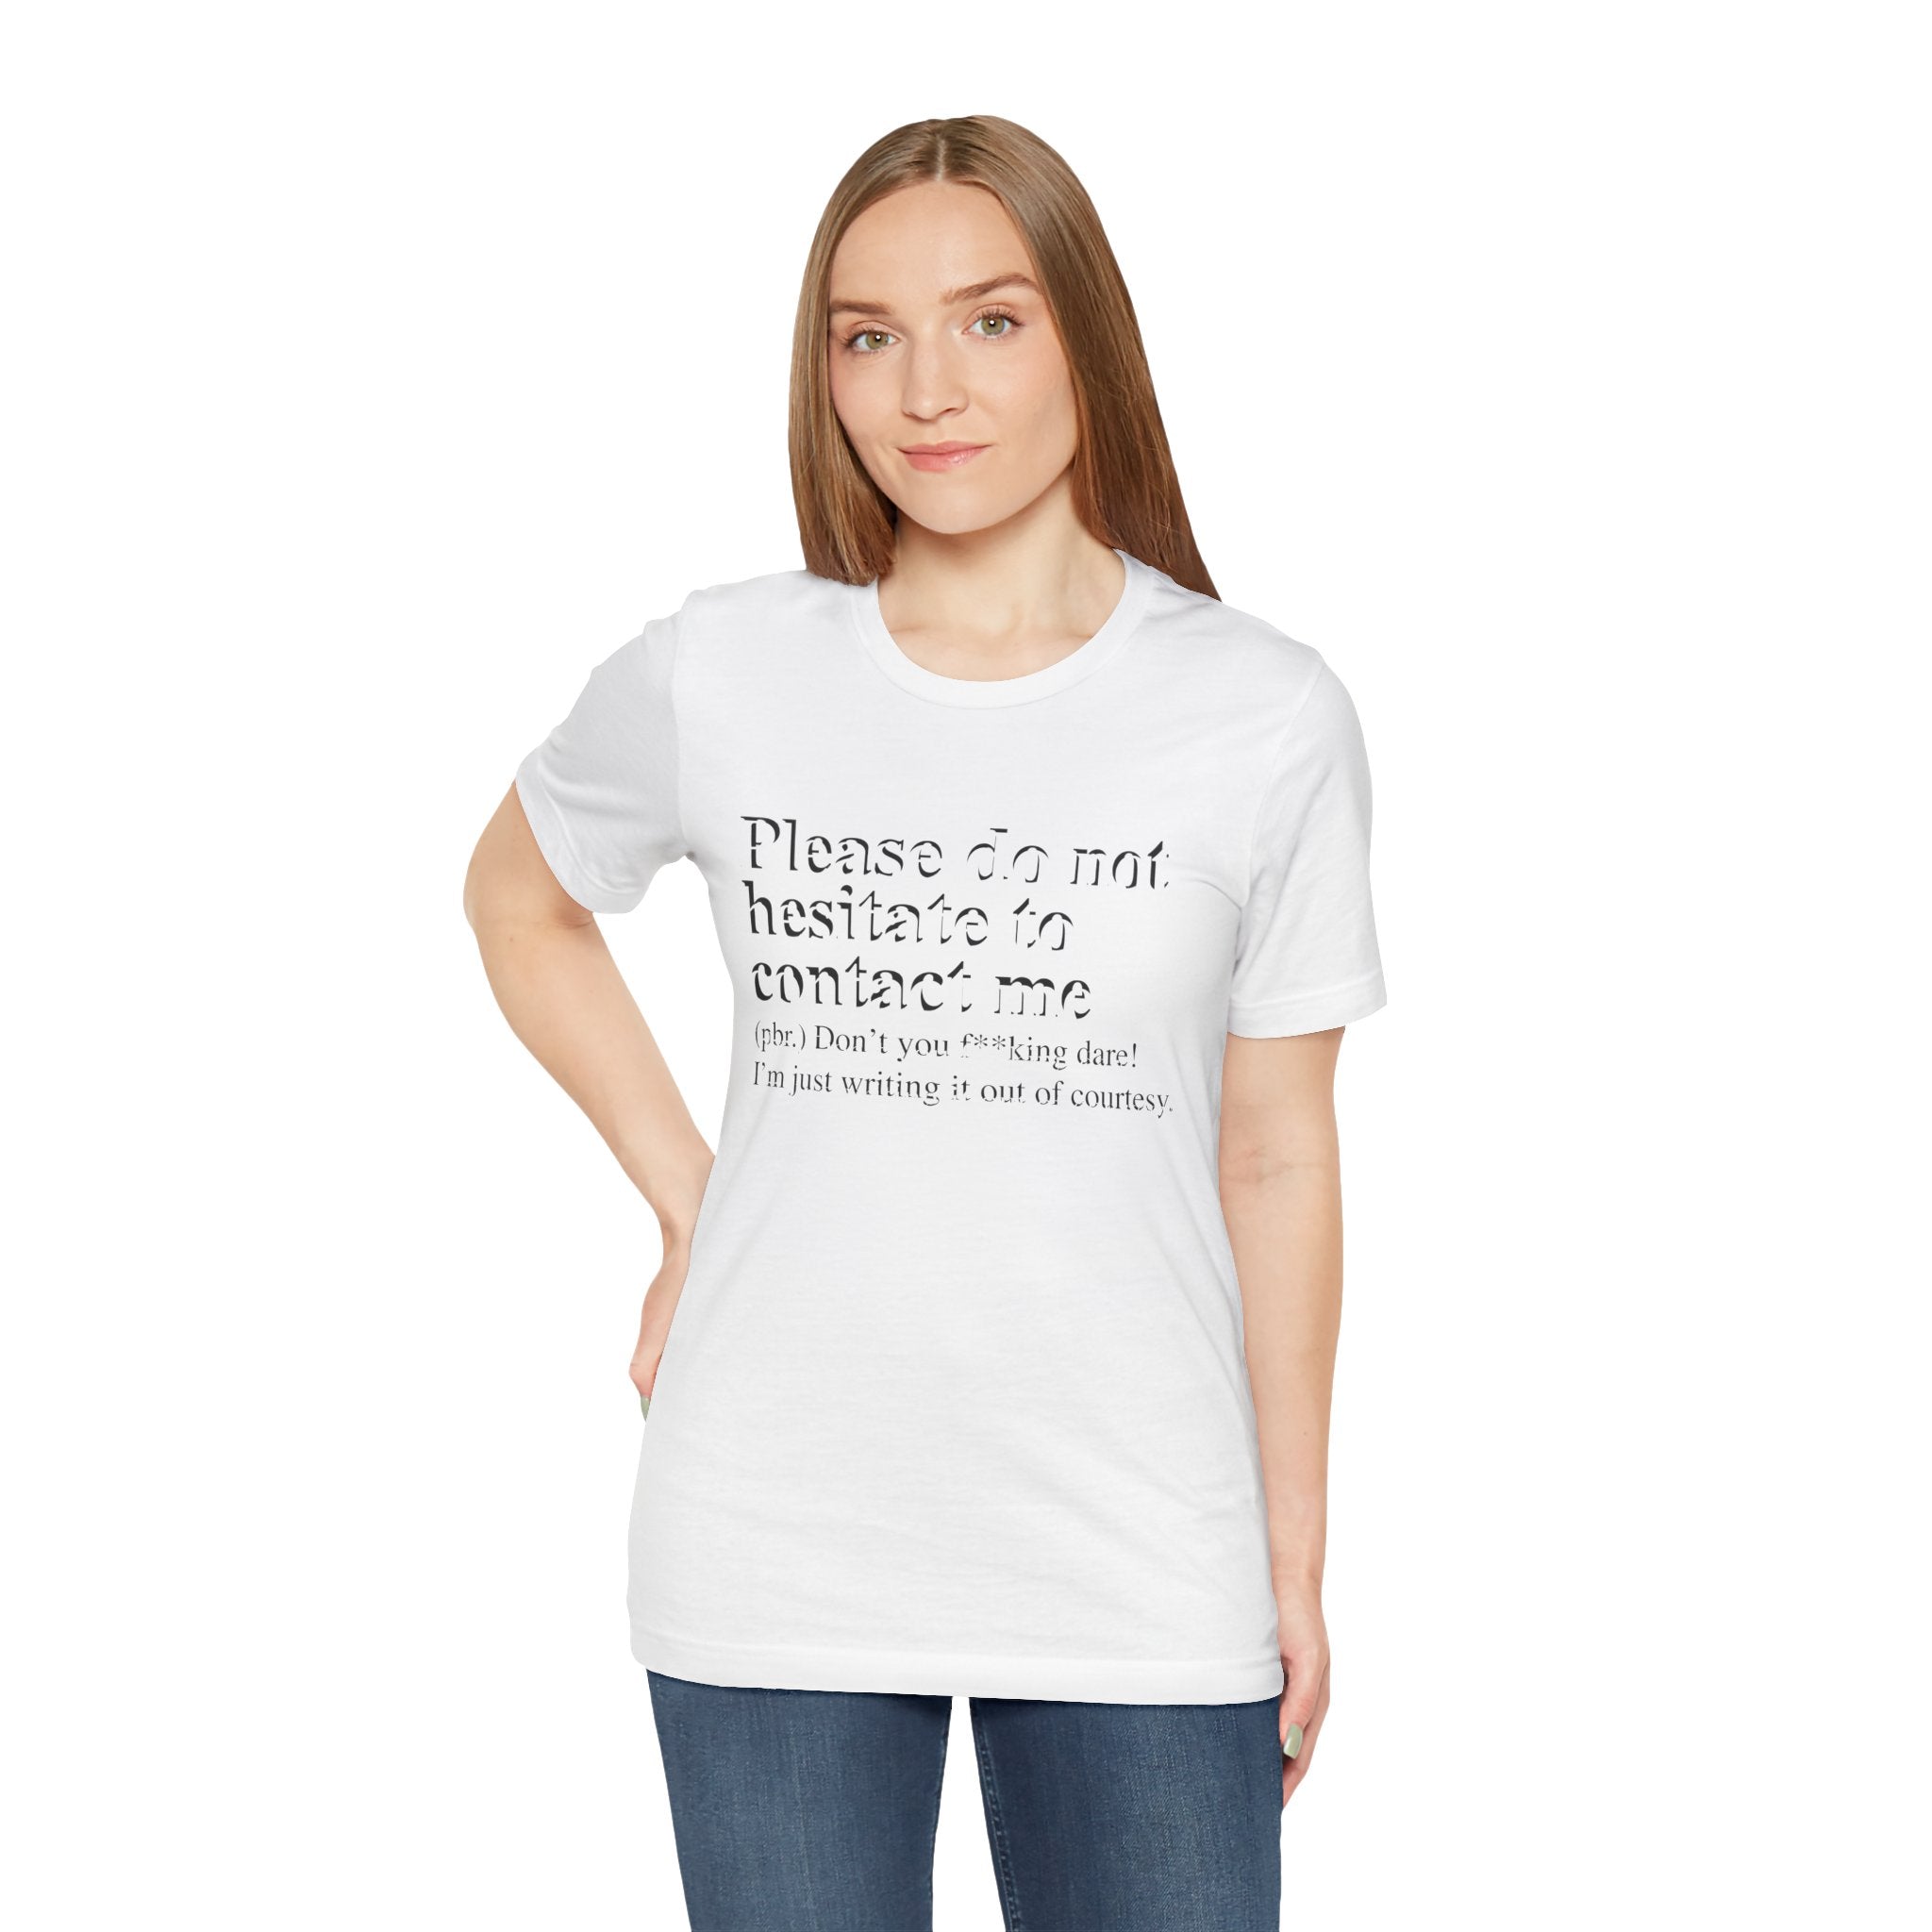 Sentence with replaced product name: A woman in a white, soft cotton Please Do Not Hesitate to Contact Me T-shirt with text that reads "please do not hesitate to contact me [don't you f*ing dare! I'm just writing it out of courtesy].